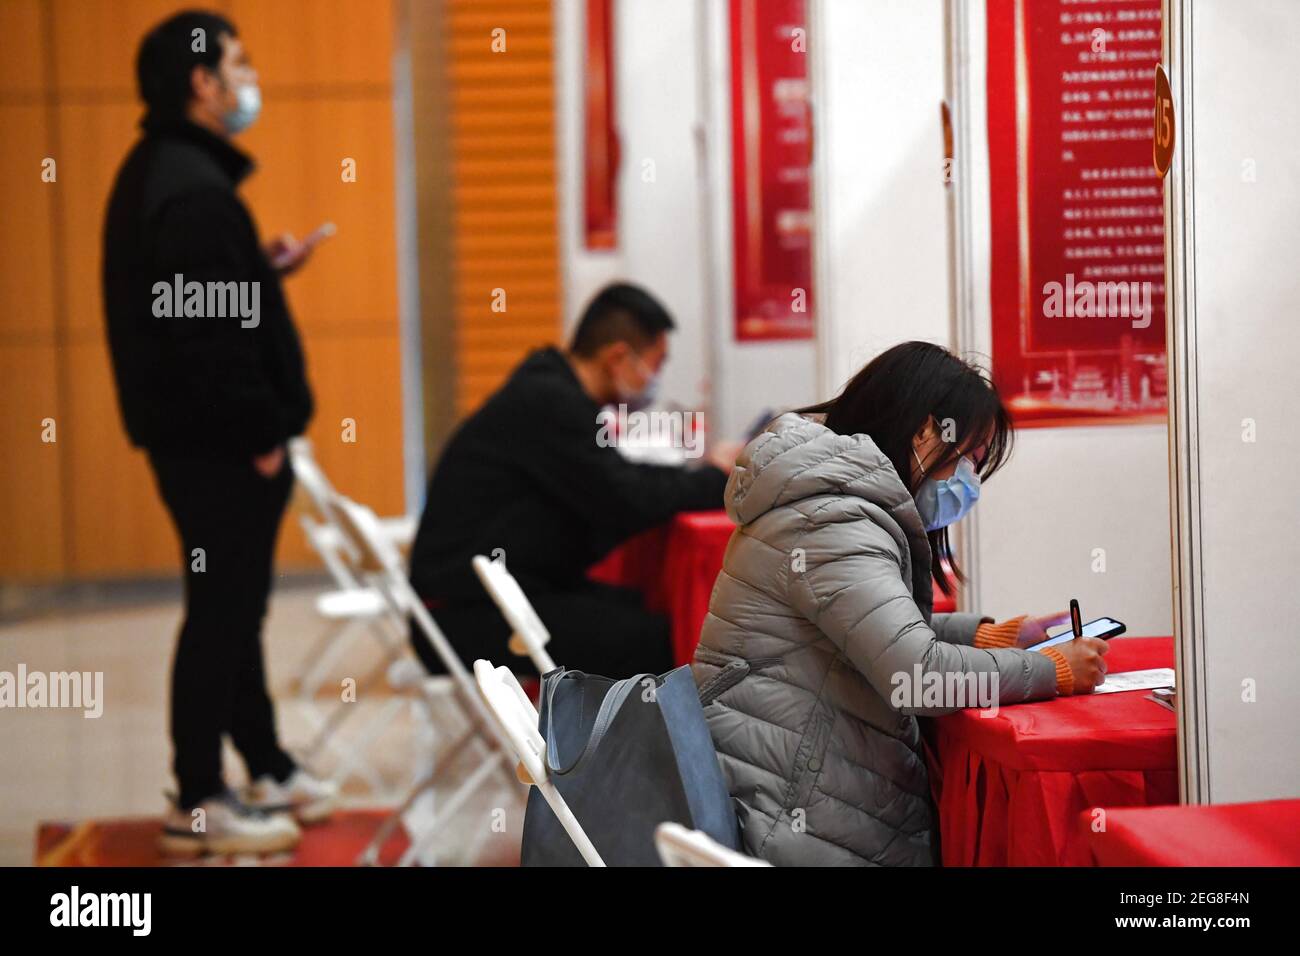 Changsha, China, 18 Feb 2021: Applicants fill in personal information sheets before interviews on a job fair at the Tianxin cultural industry park in Changsha, central China's Hunan Province, Feb. 18, 2021. The job fair, sponsored by the authority of Tianxin District of Changsha with assistance from authorities of Shifeng District of Zhuzhou City and Yuetang District of Xiangtan City, all in Hunan, took place in both on-line and off-line forms, and covered a variety of sectors such as software, culture and advertisement, smart manufacturing, and medicine and health. (Xinhua/C Credit: Xinhua/Al Stock Photo